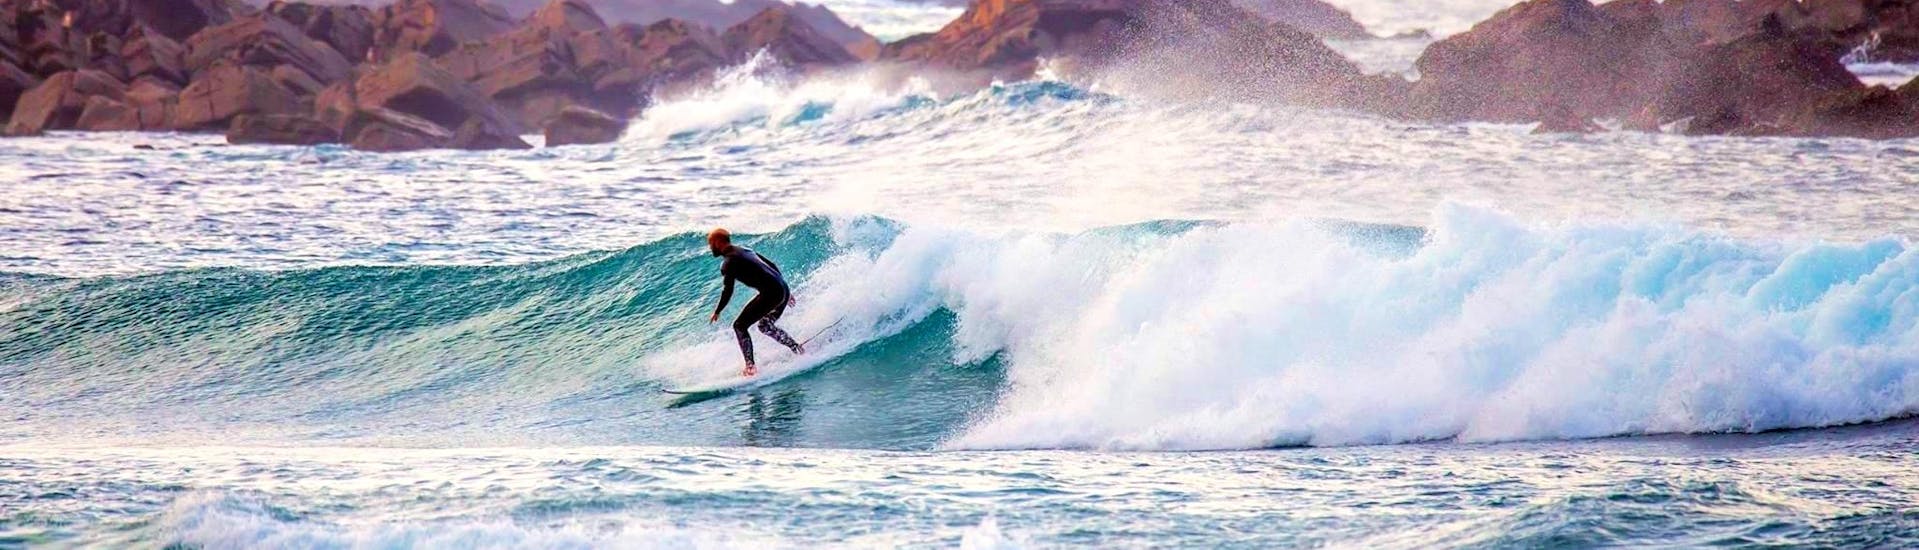 A participant of the Surfing Lessons on the Costa Vicentina with Pick-Up is improving his surfing skills in the Algarve with the help of an instructor from Neptunos Surf School Algarve.